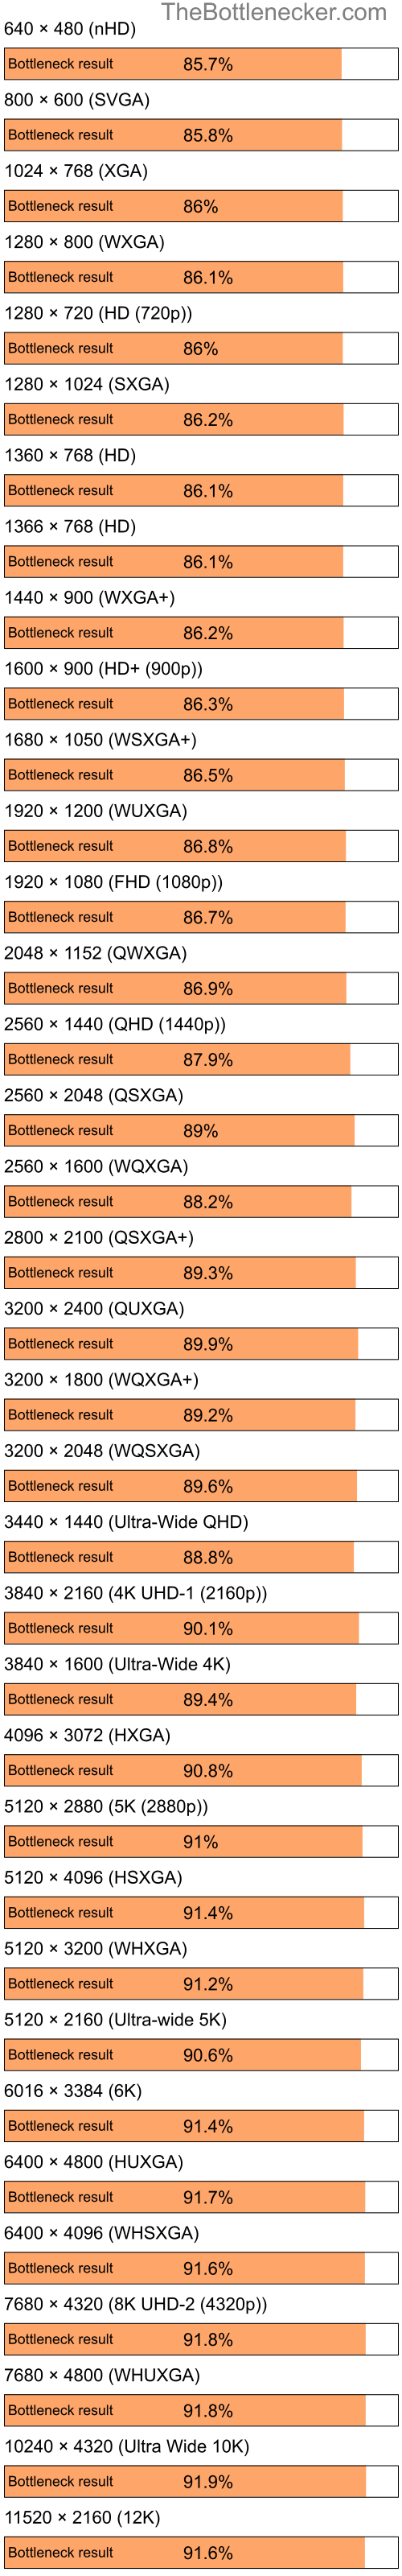 Bottleneck results by resolution for Intel Pentium 4 and NVIDIA GeForce FX 5600XT in General Tasks